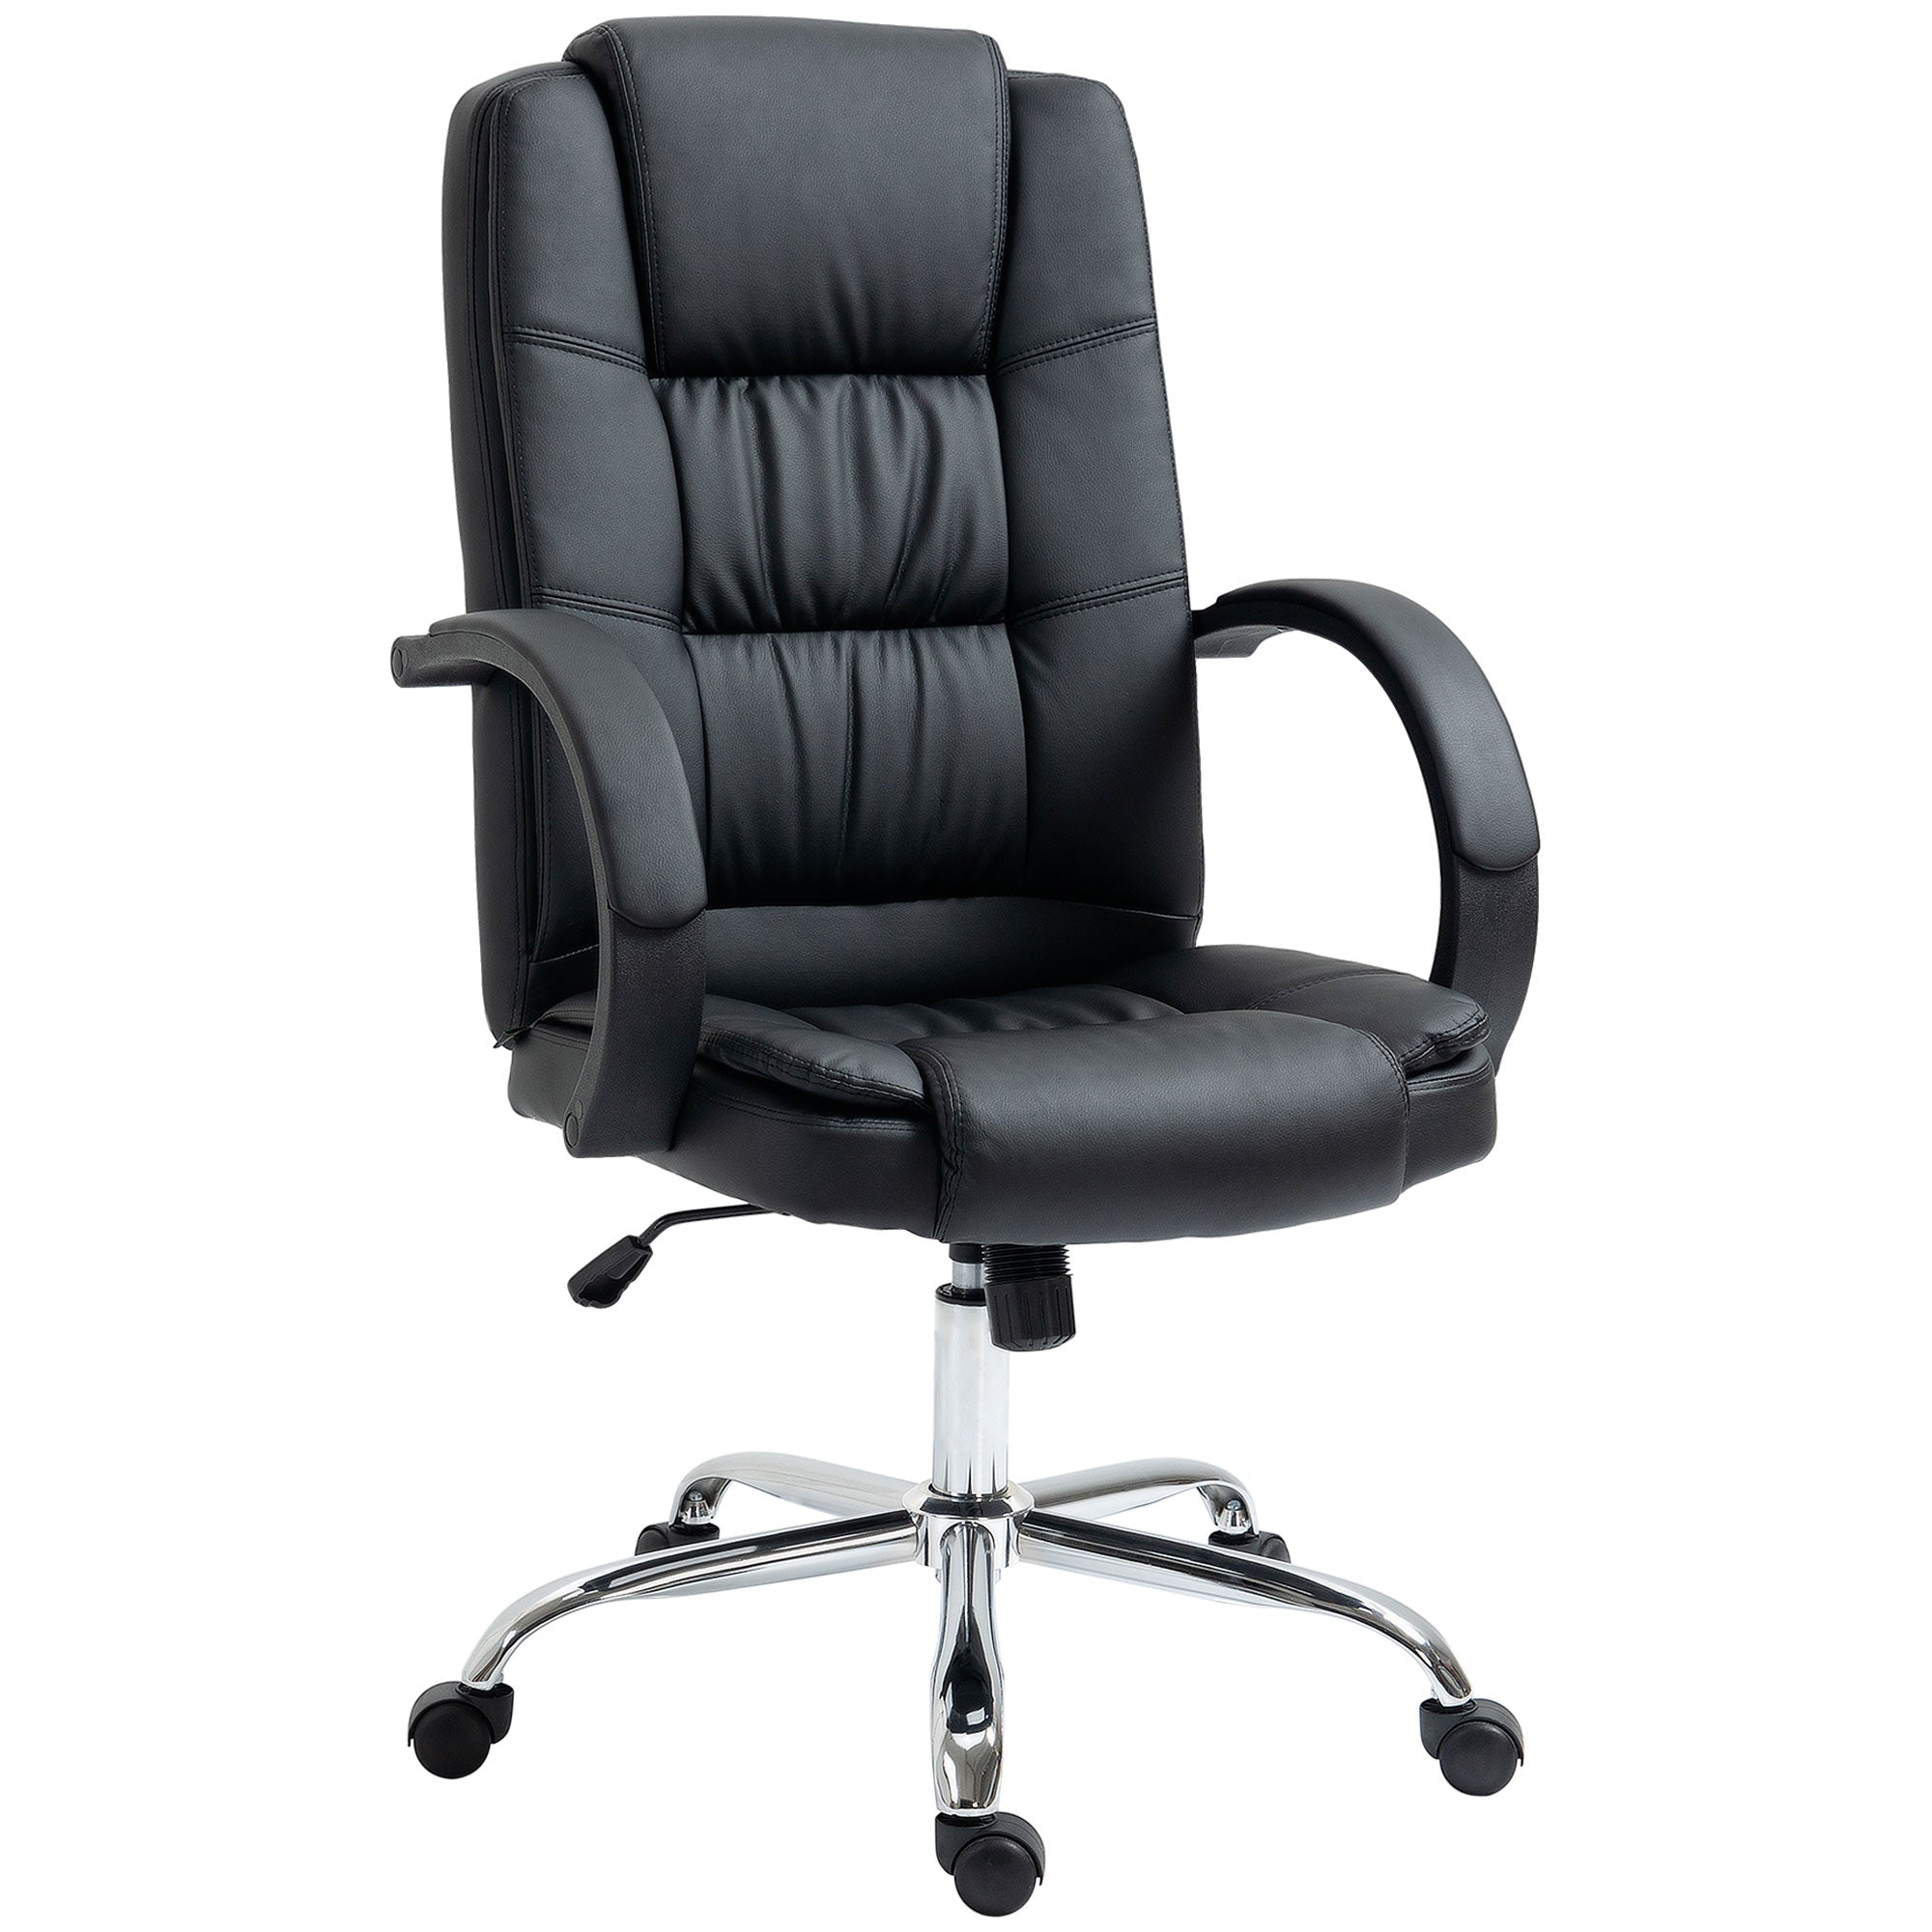 High Back Swivel Chair, PU Leather Executive Office Chair with Padded Armrests, Adjustable Height, Tilt Function, Black-0